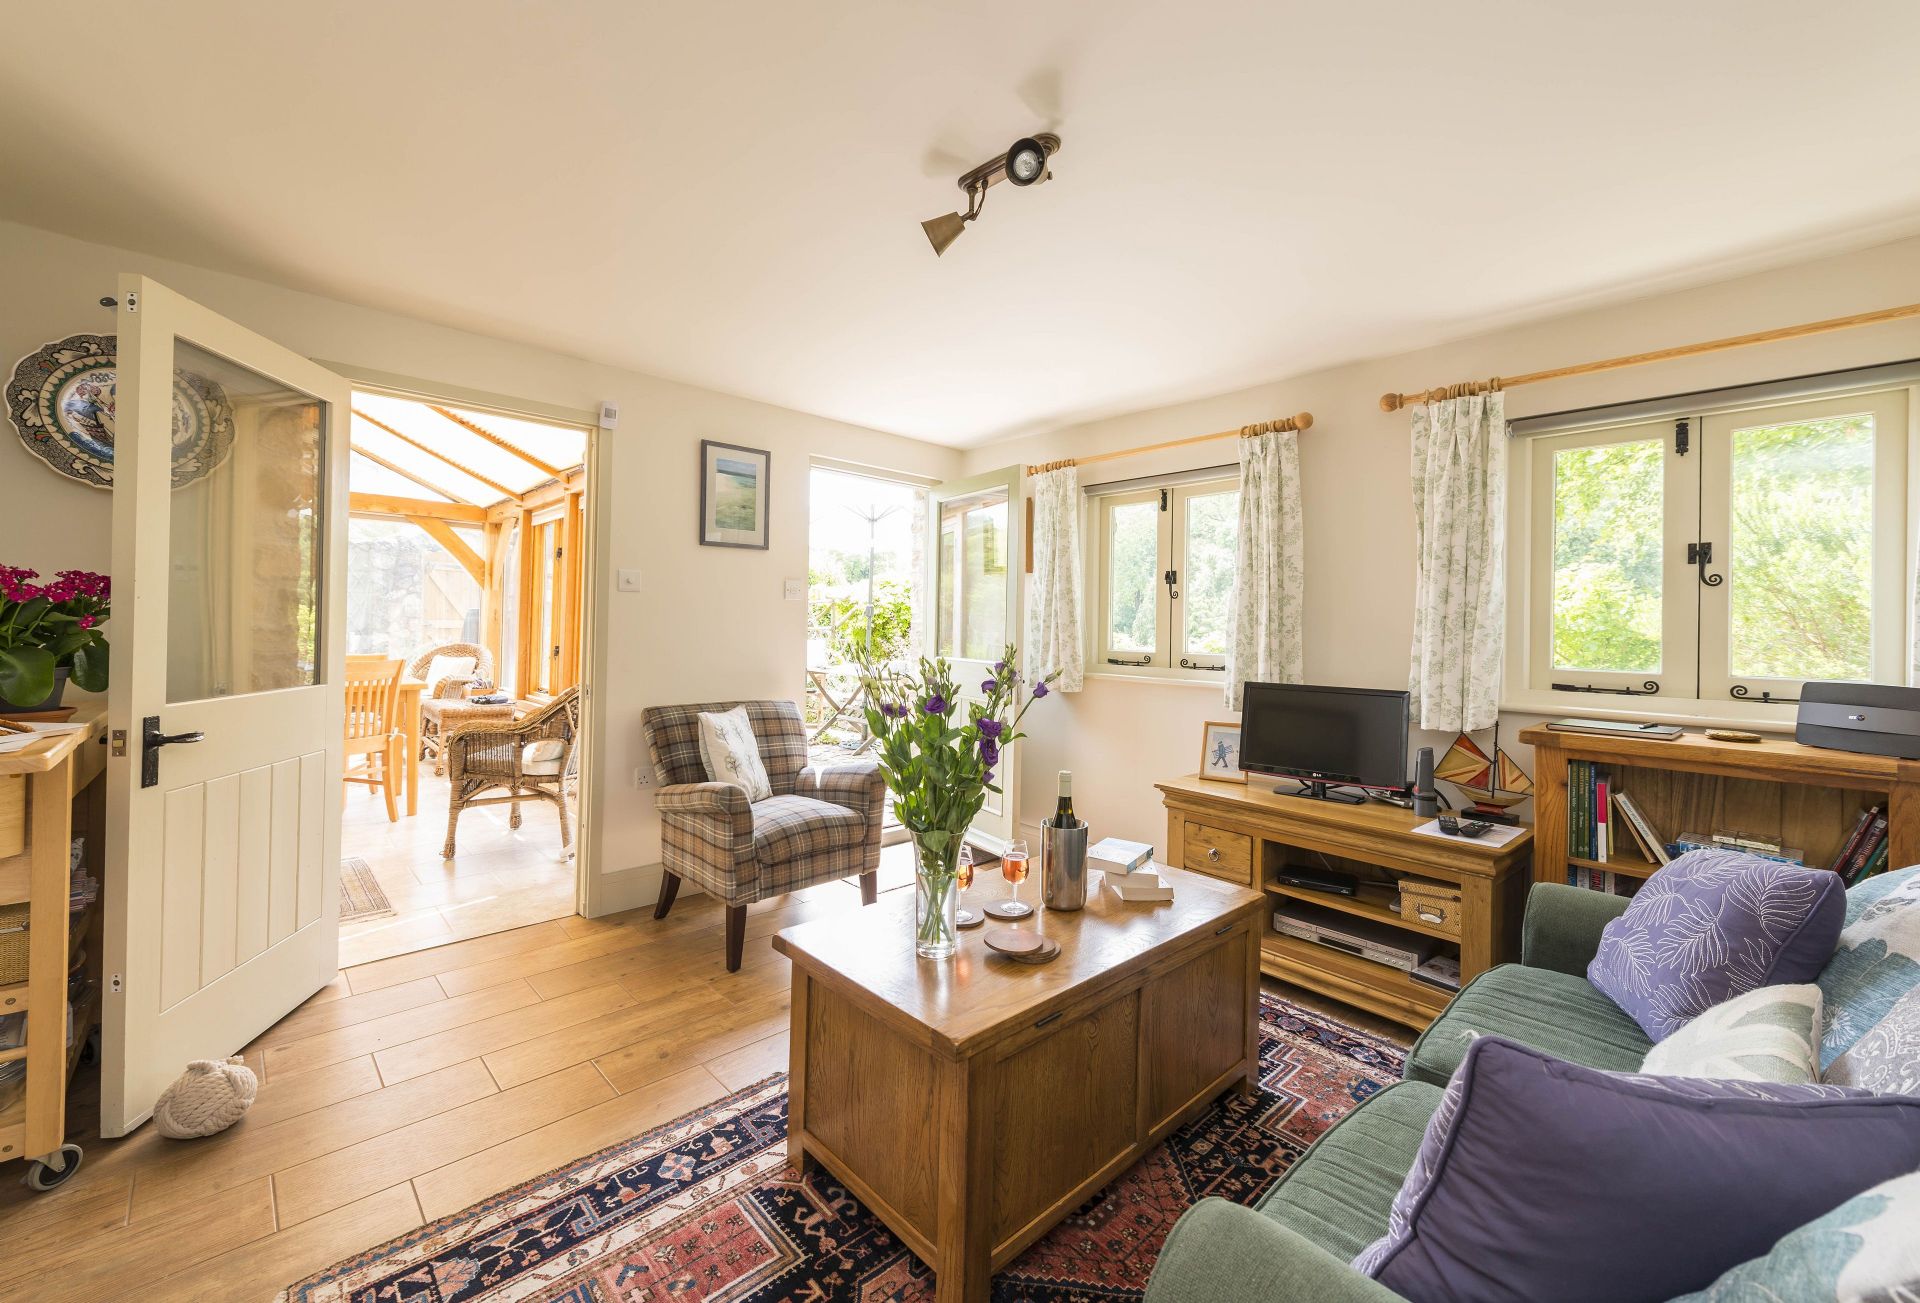 Garden Cottage is located in Weymouth and surrounding villages